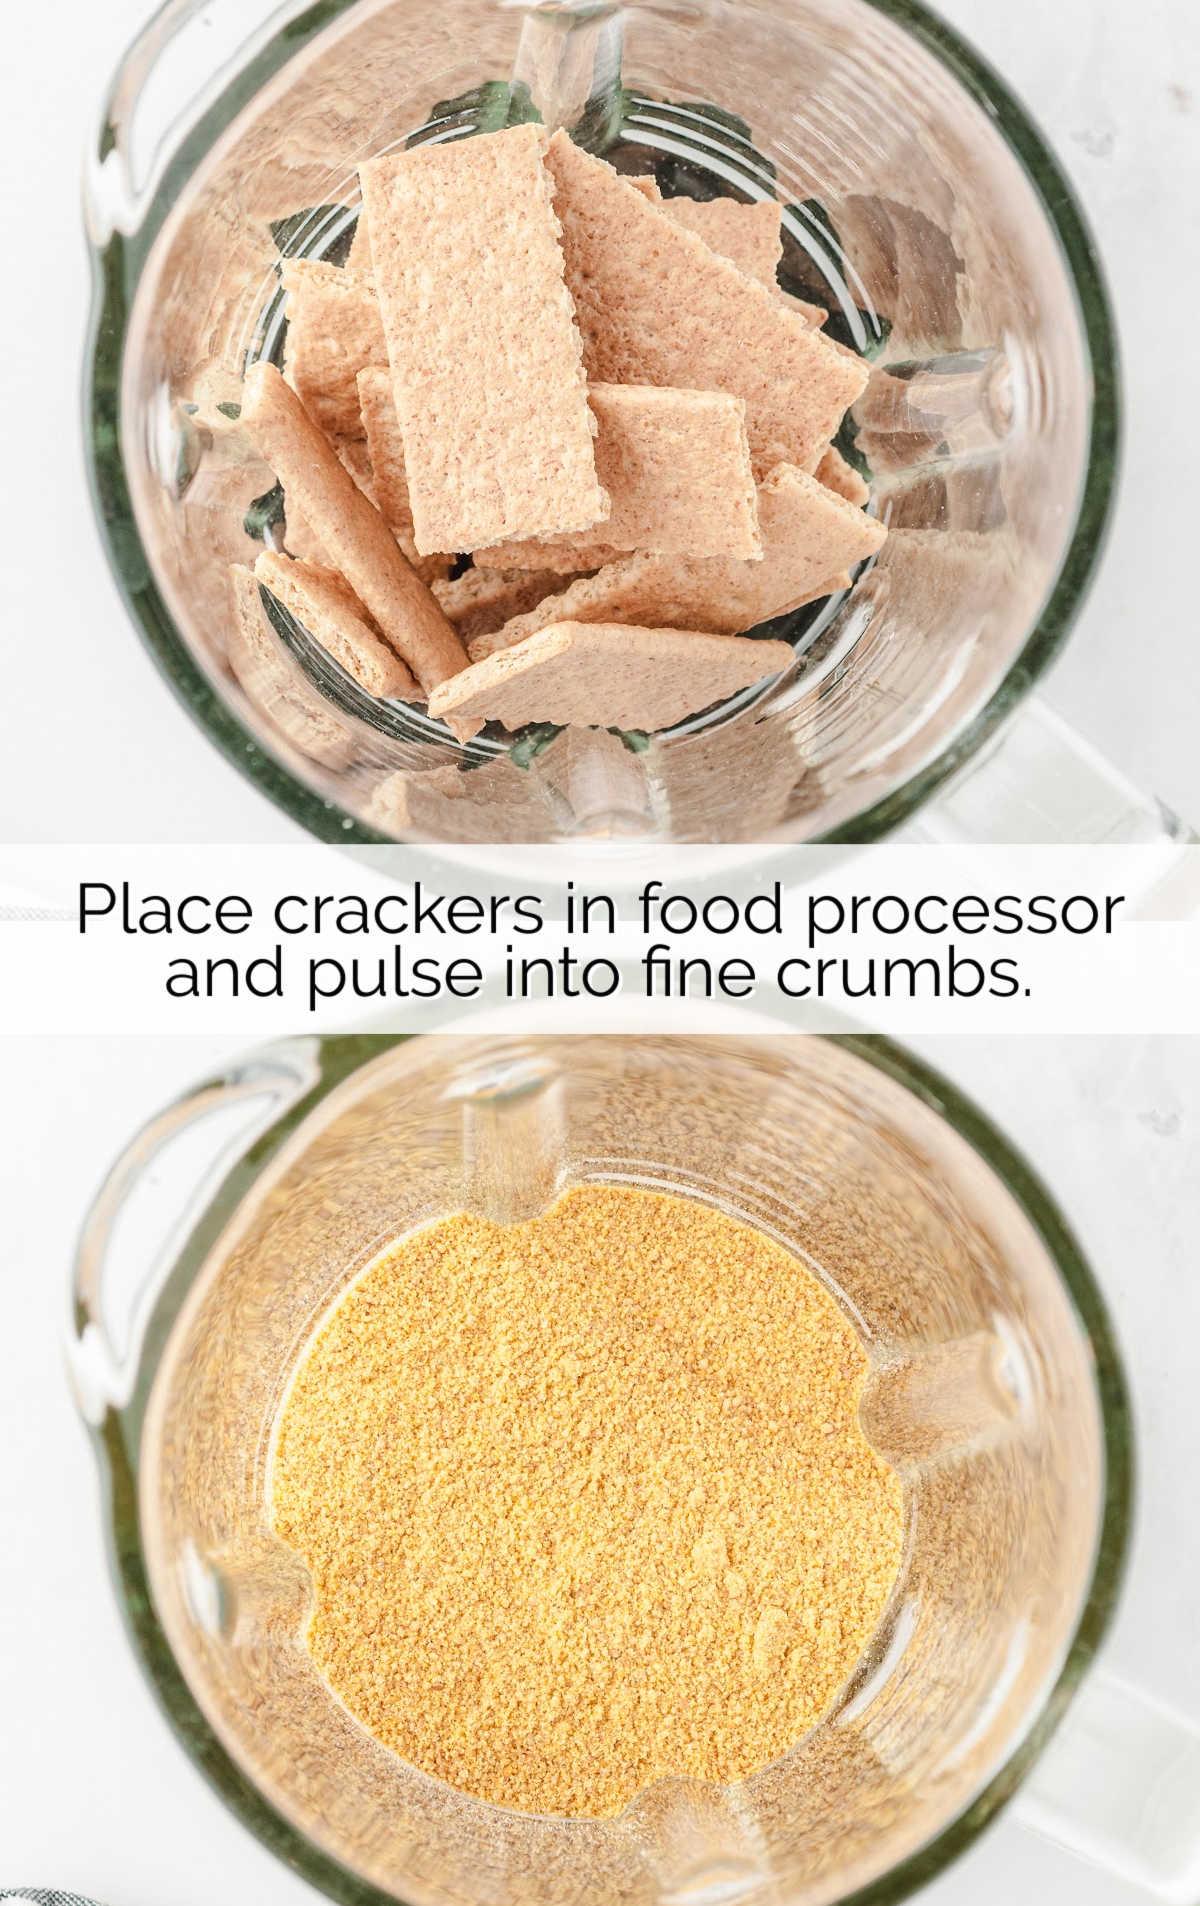 graham crackers in a bowl and then pulsed into crumbs in a bowl